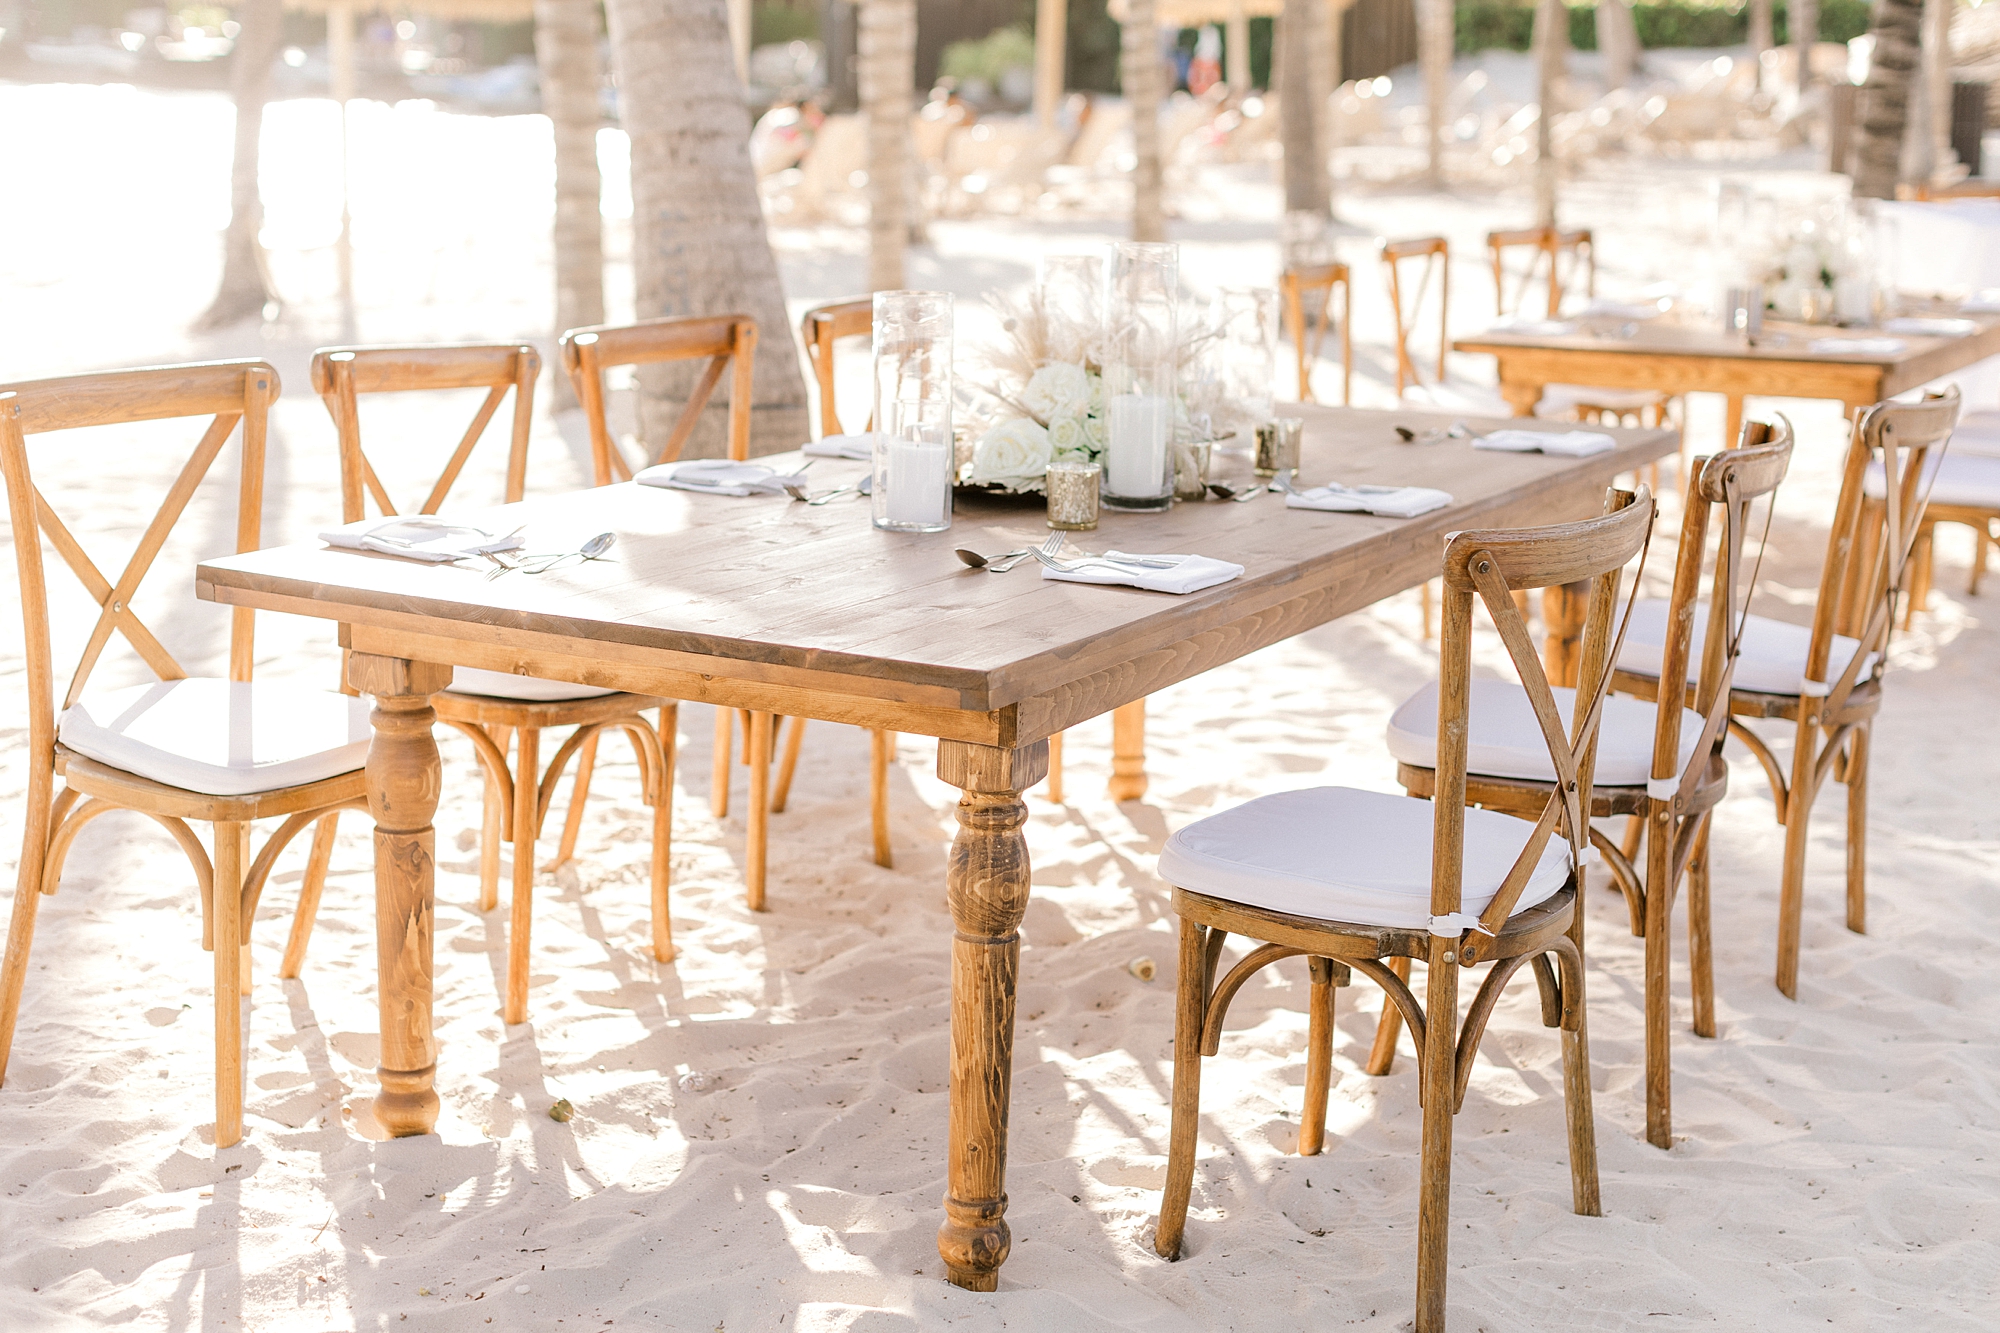 wedding reception seating at wooden table on beach on Flamingo Island